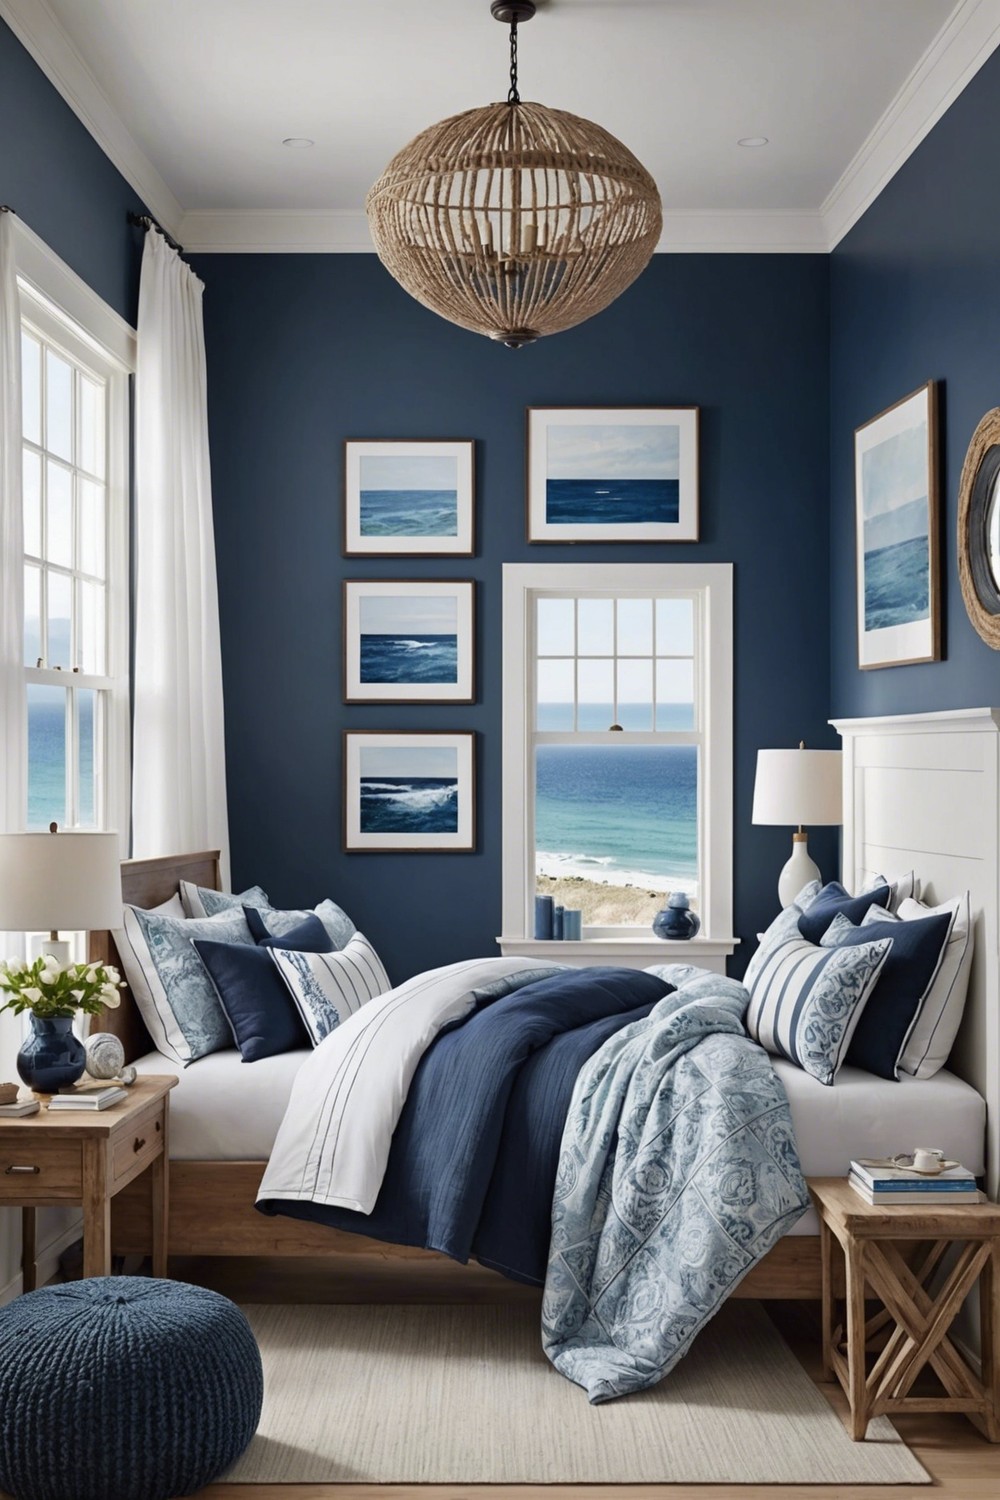 Coastal Cool: White Walls with Blues and Whites